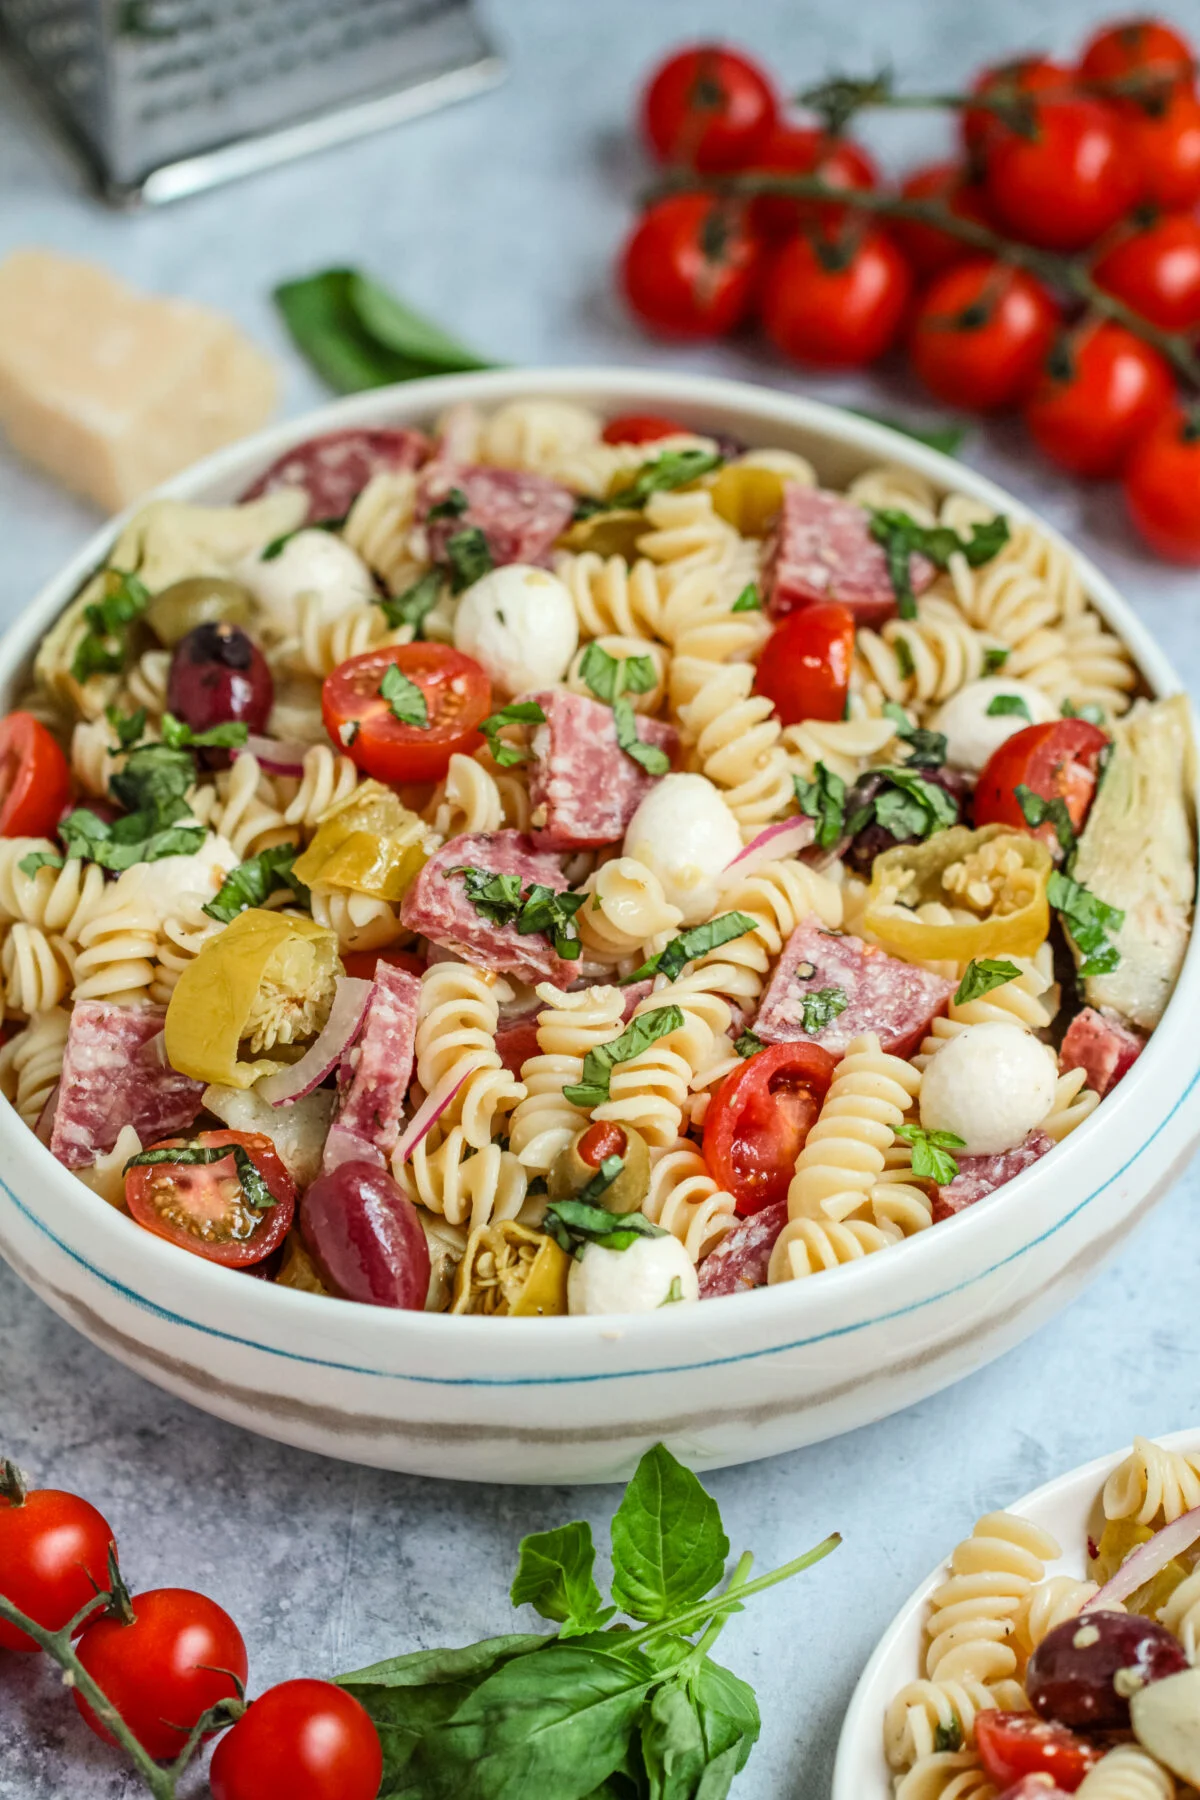 Bring delicious Italian flavours together in one easy side dish with this colourful antipasto pasta salad. Perfect for any occasion!